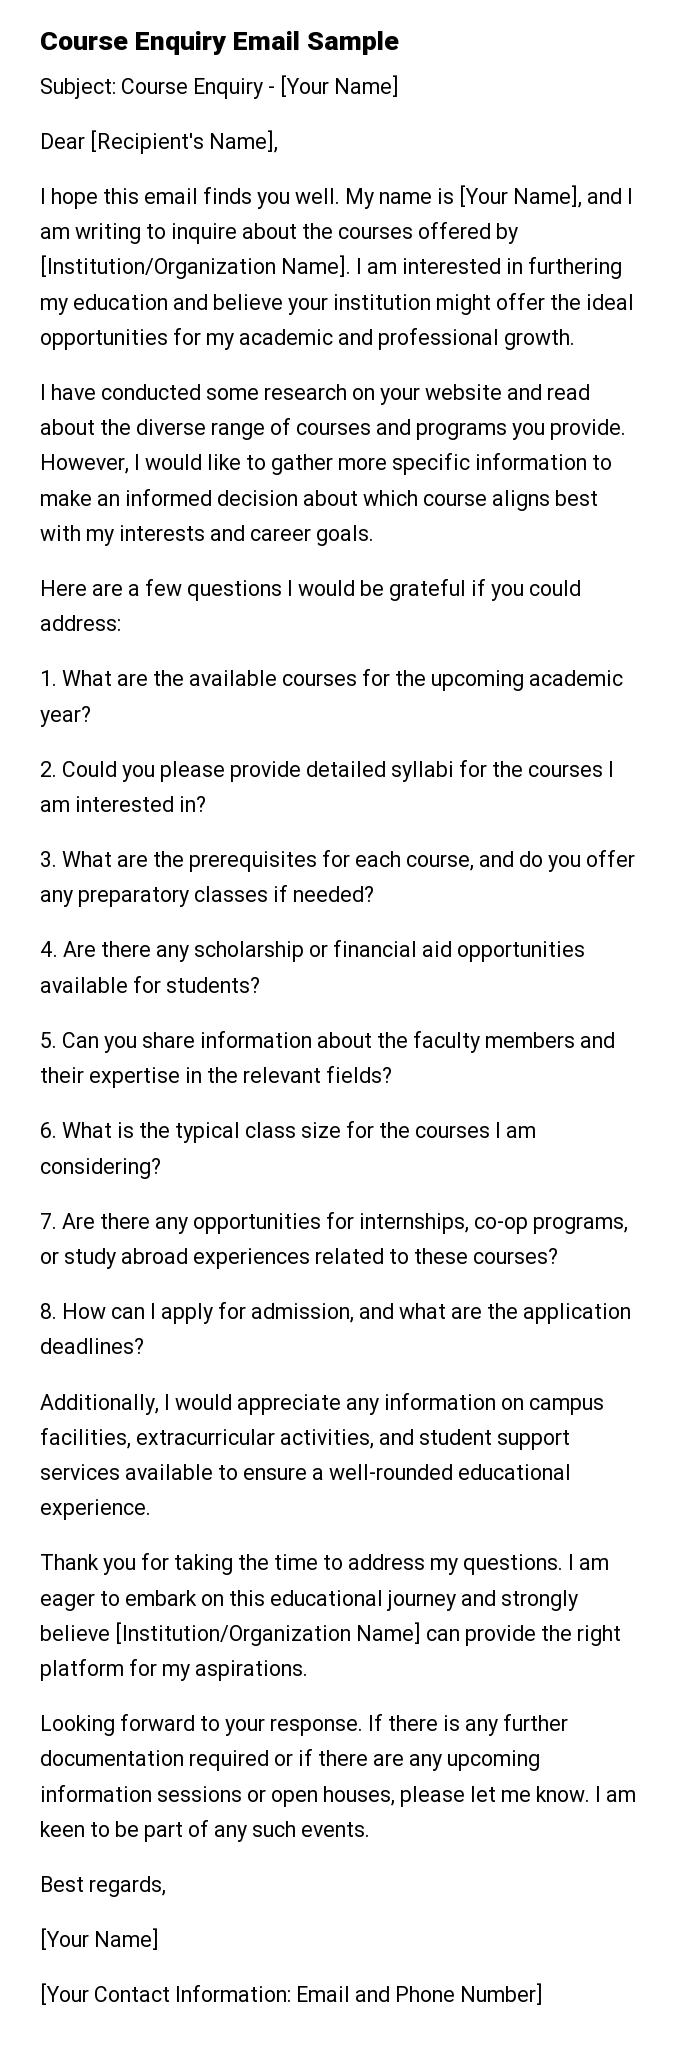 Course Enquiry Email Sample